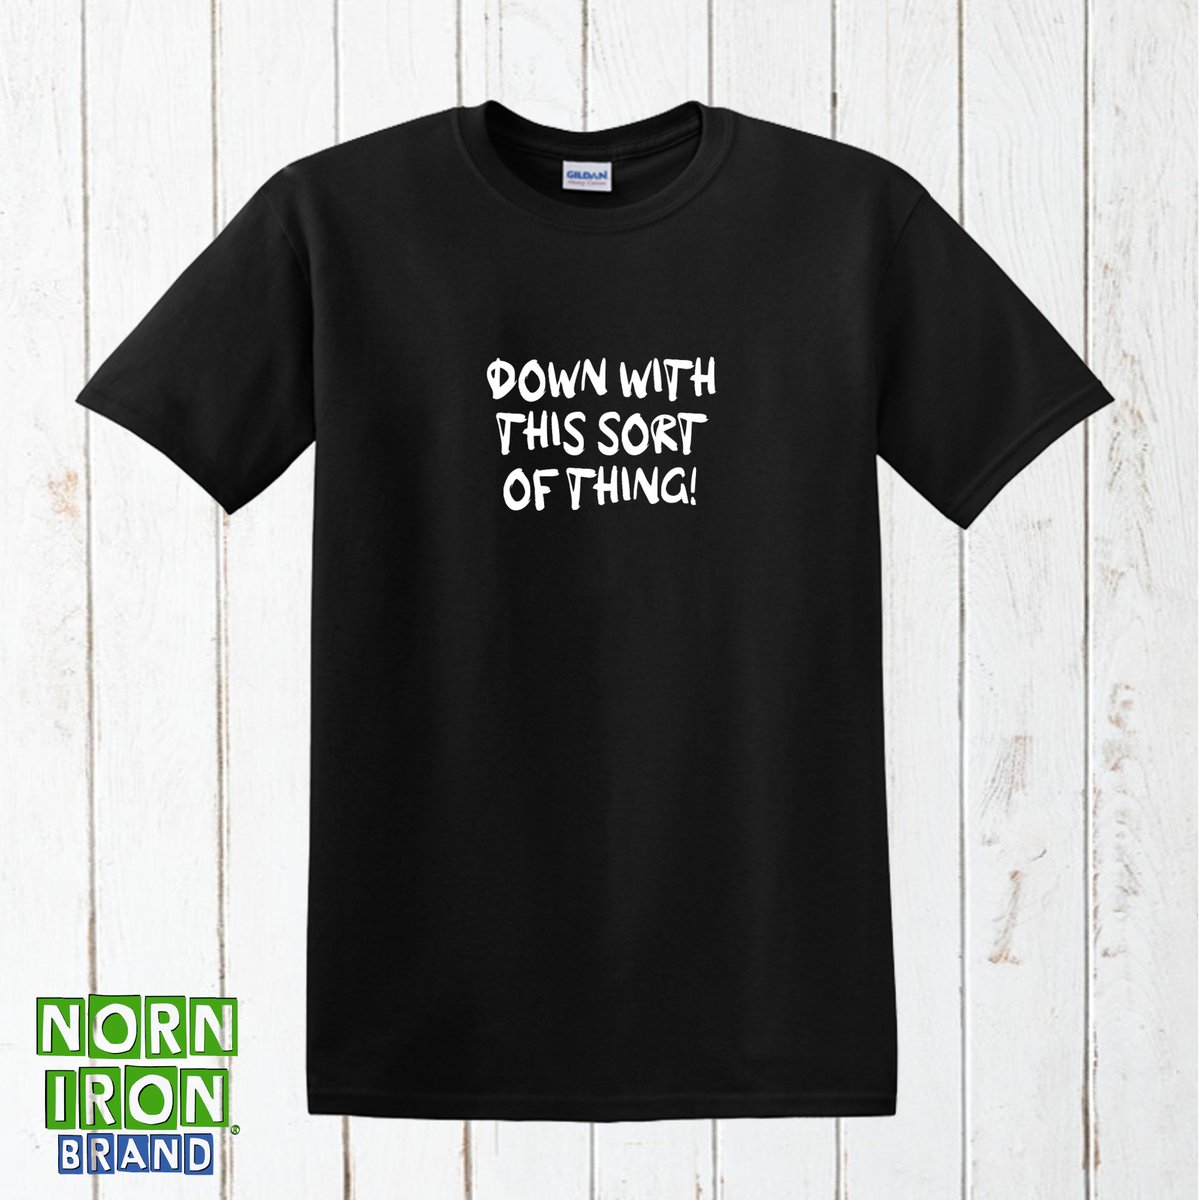 Down With This Sort Of Thing! T-Shirt